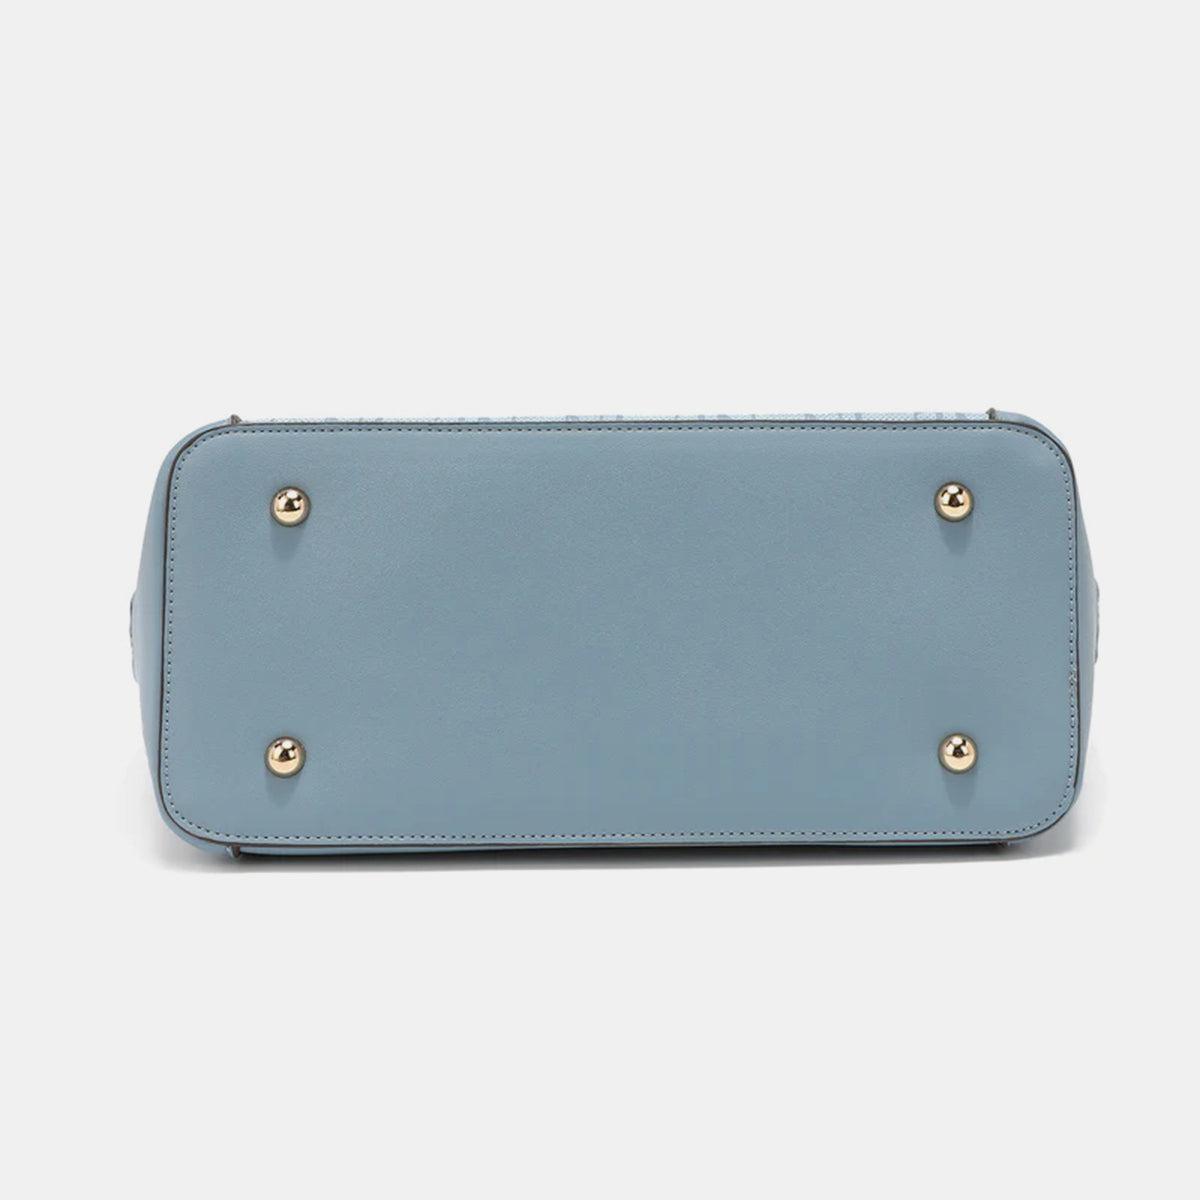 a light blue purse with gold hardwares